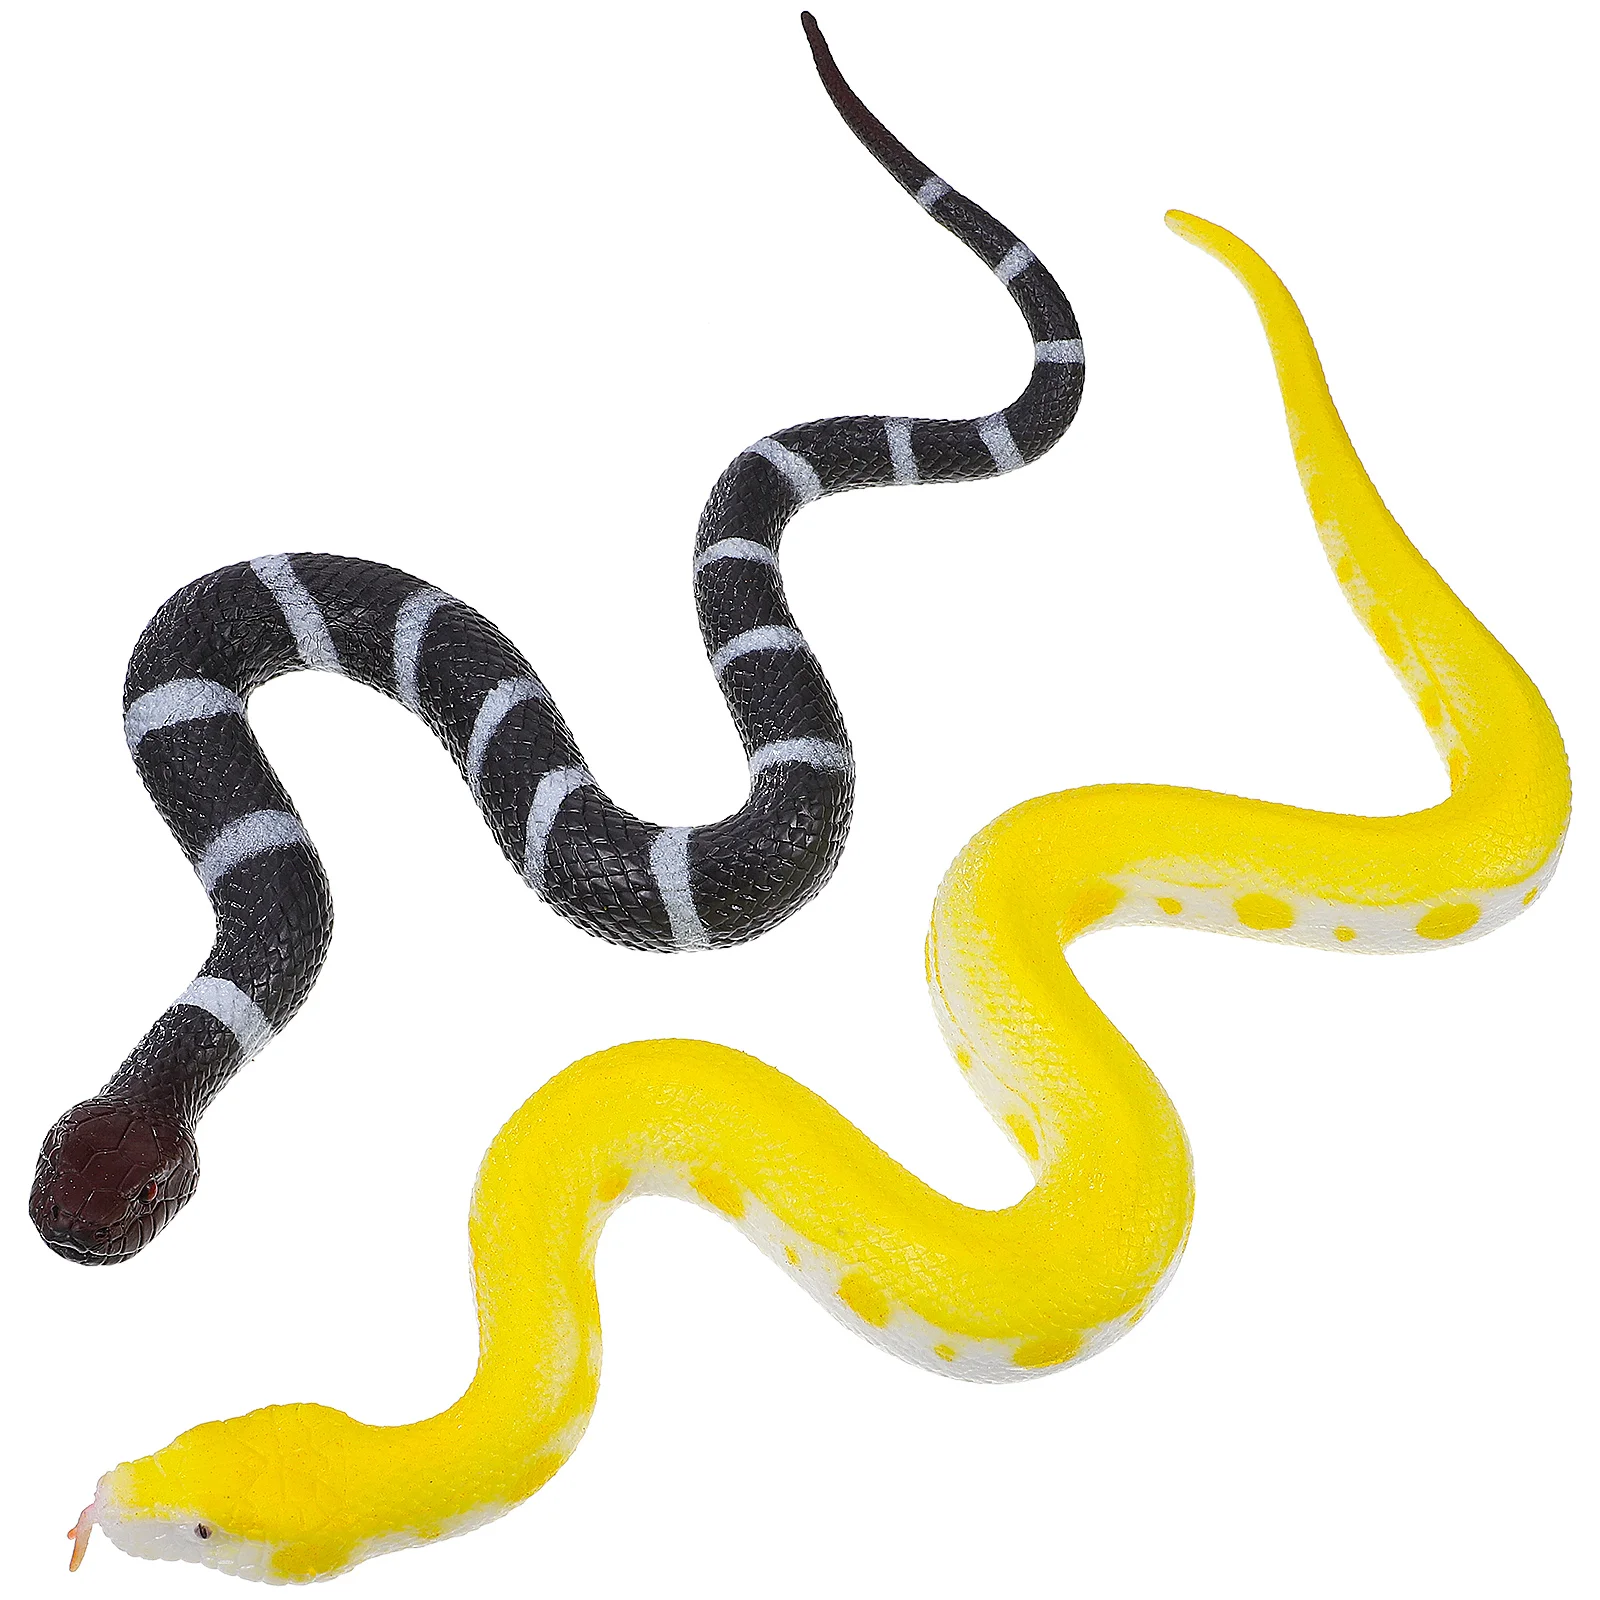 

2 Pcs Animals Toys Snake Rubber Snakes Halloween Trick Props Crawl Fake Tpr Realistic Tricky Child Prank Plastic Scare Birds